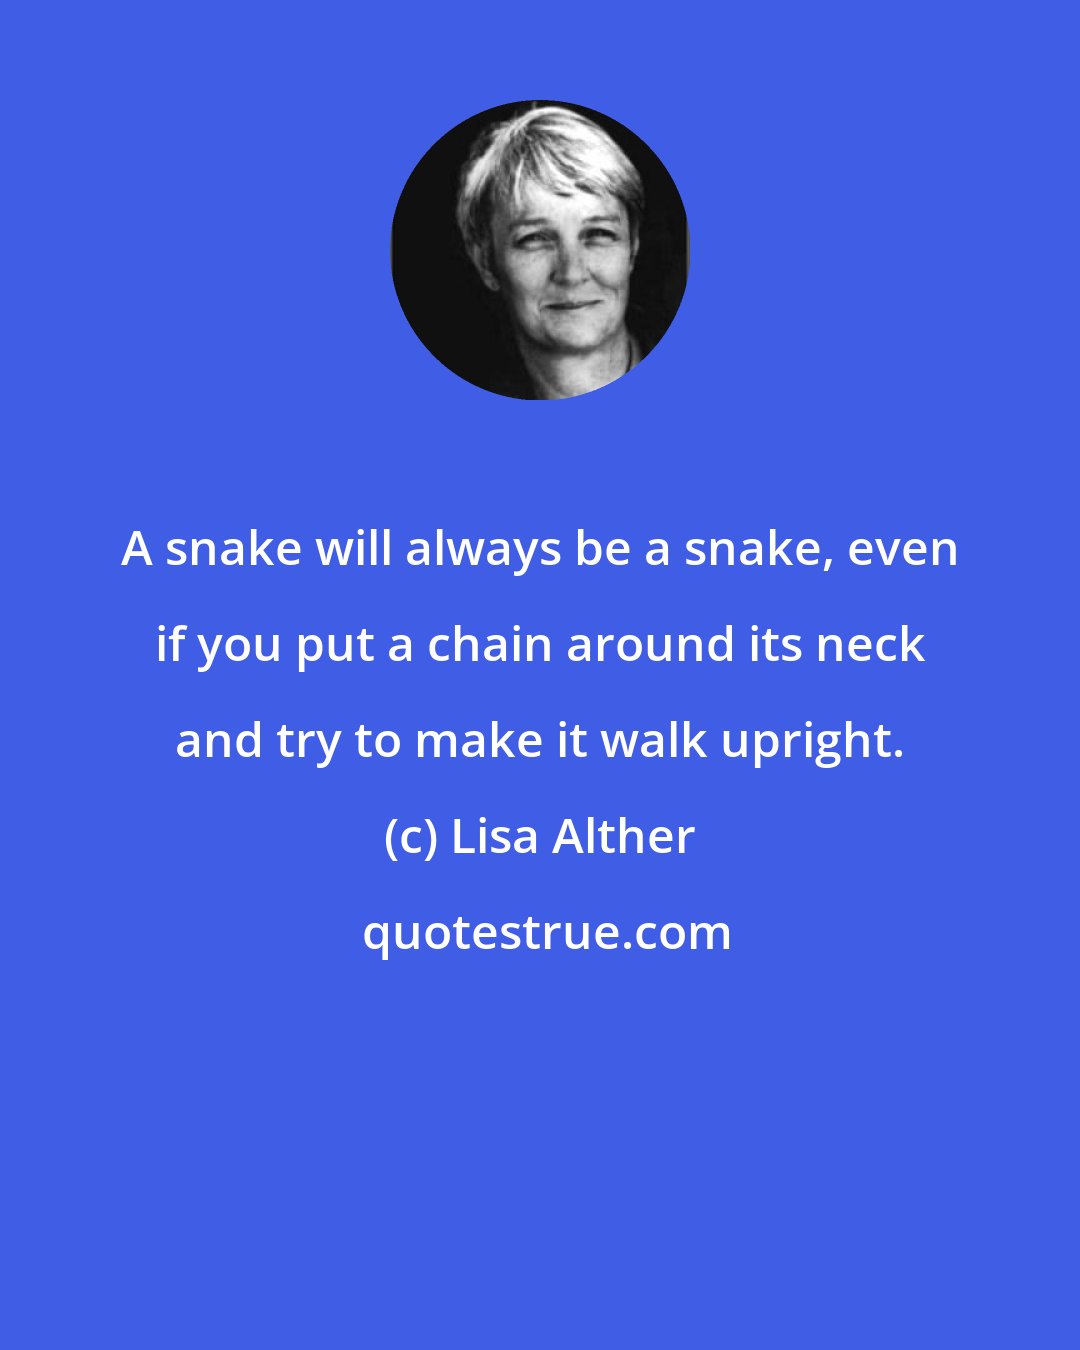 Lisa Alther: A snake will always be a snake, even if you put a chain around its neck and try to make it walk upright.